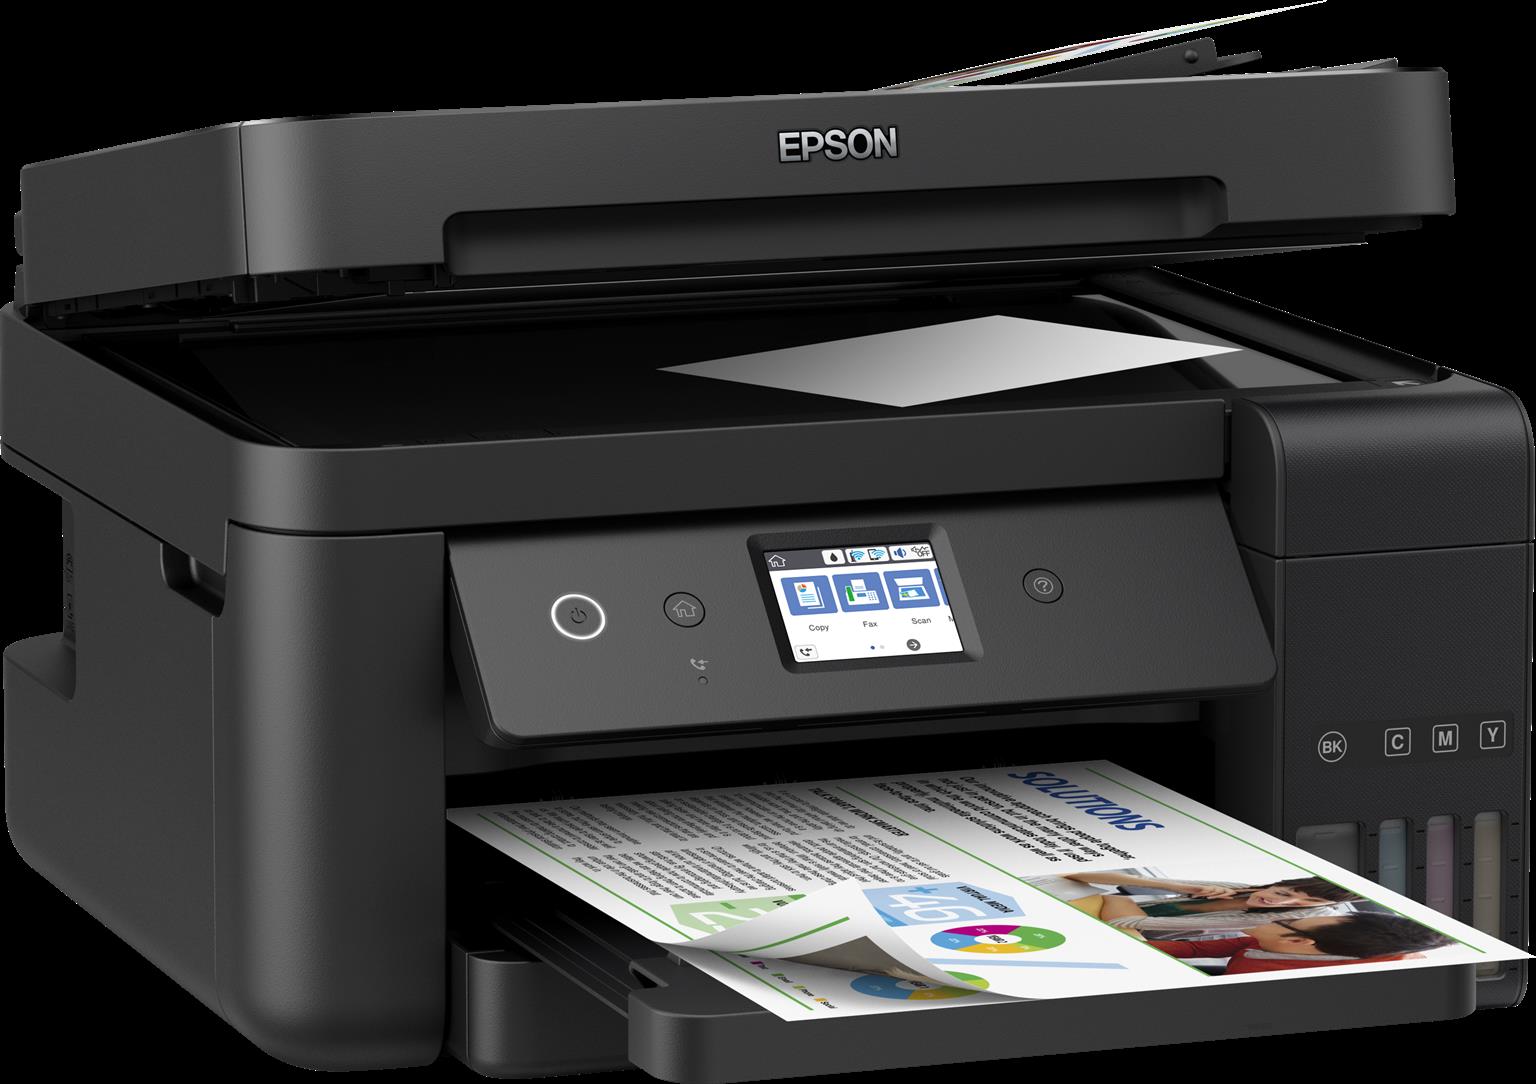 Epson L6190 Wi-Fi Duplex All-in-One Ink Tank Printer with ADF Remim tech solutions